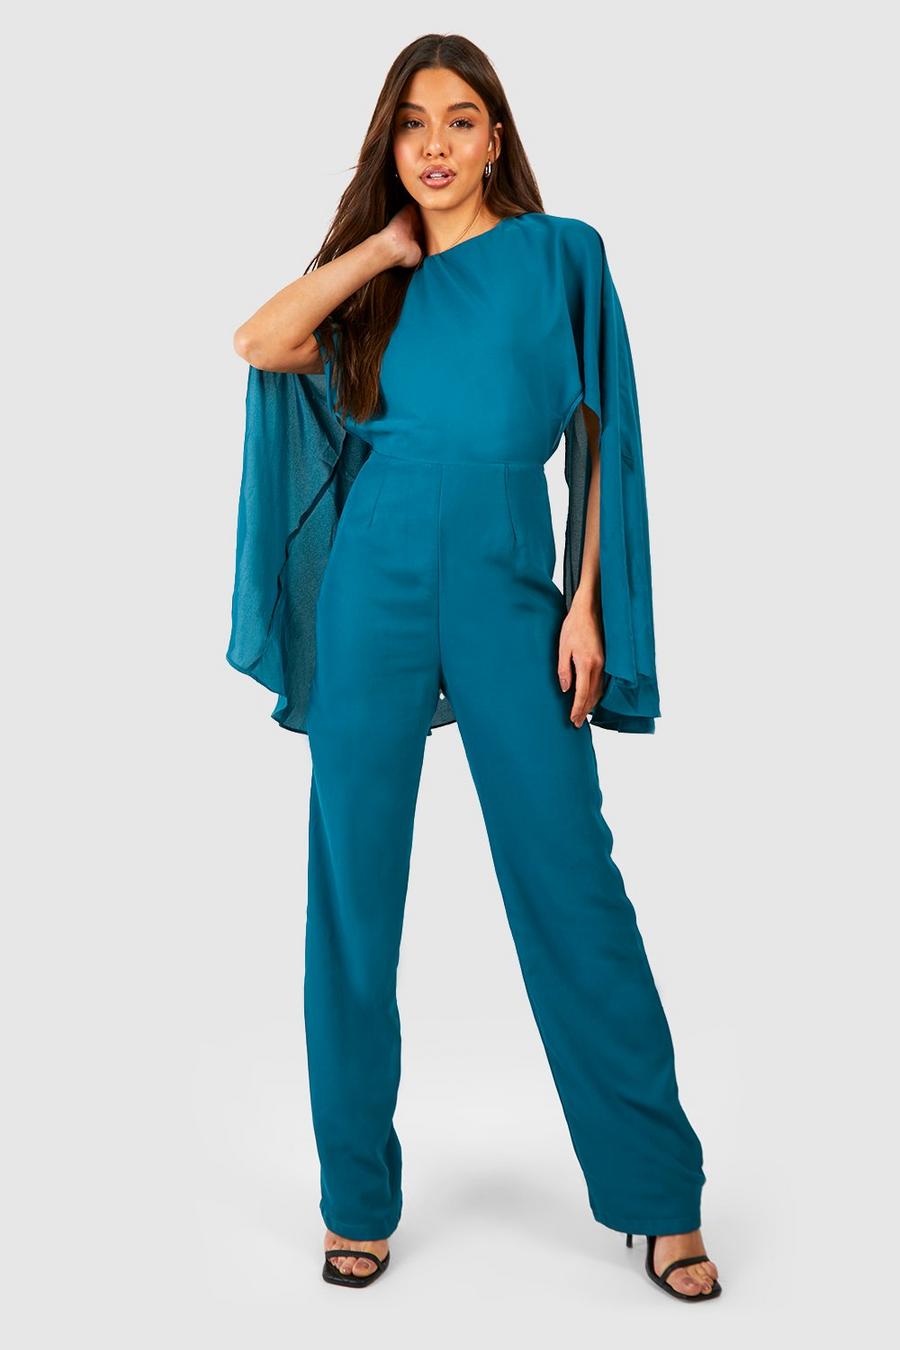 Teal Chiffon Cape Open Back Jumpsuit image number 1